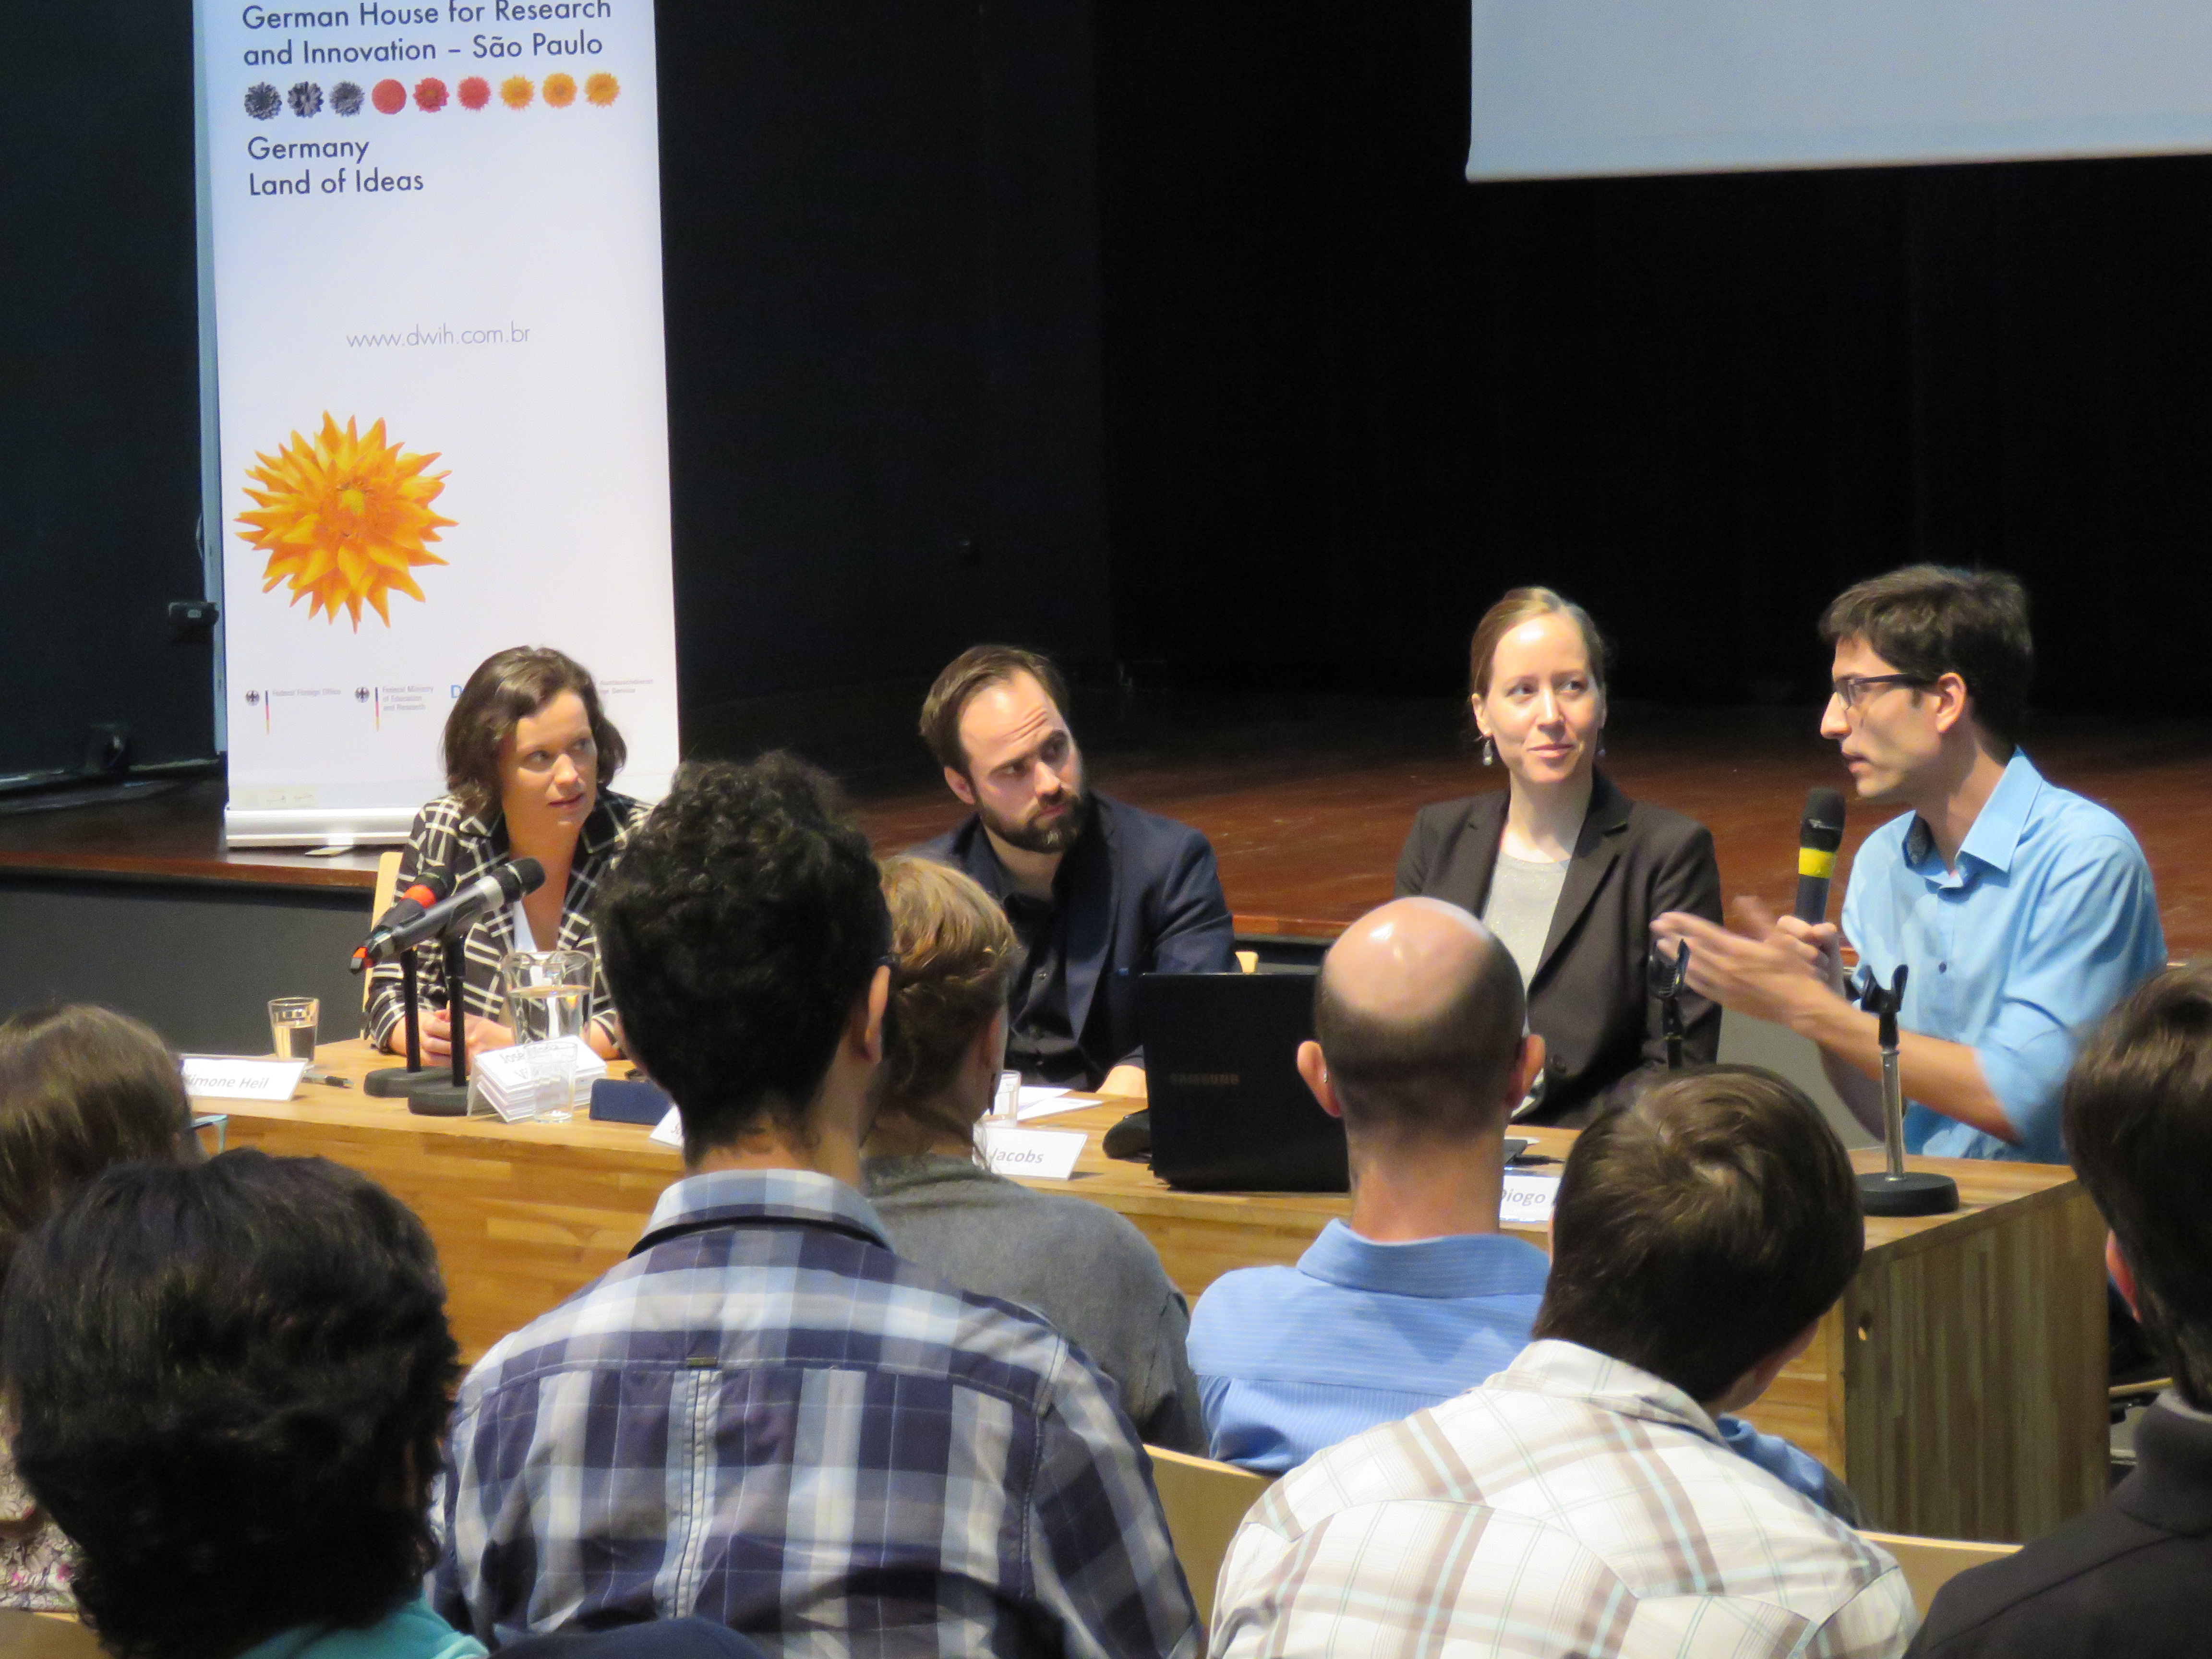 Simone Heil (AvH), Sören Metz (TUM), Nora Jacobs (FU Berlin) and Diogo Boito (USP/TUM) in the discussion with workshop participants